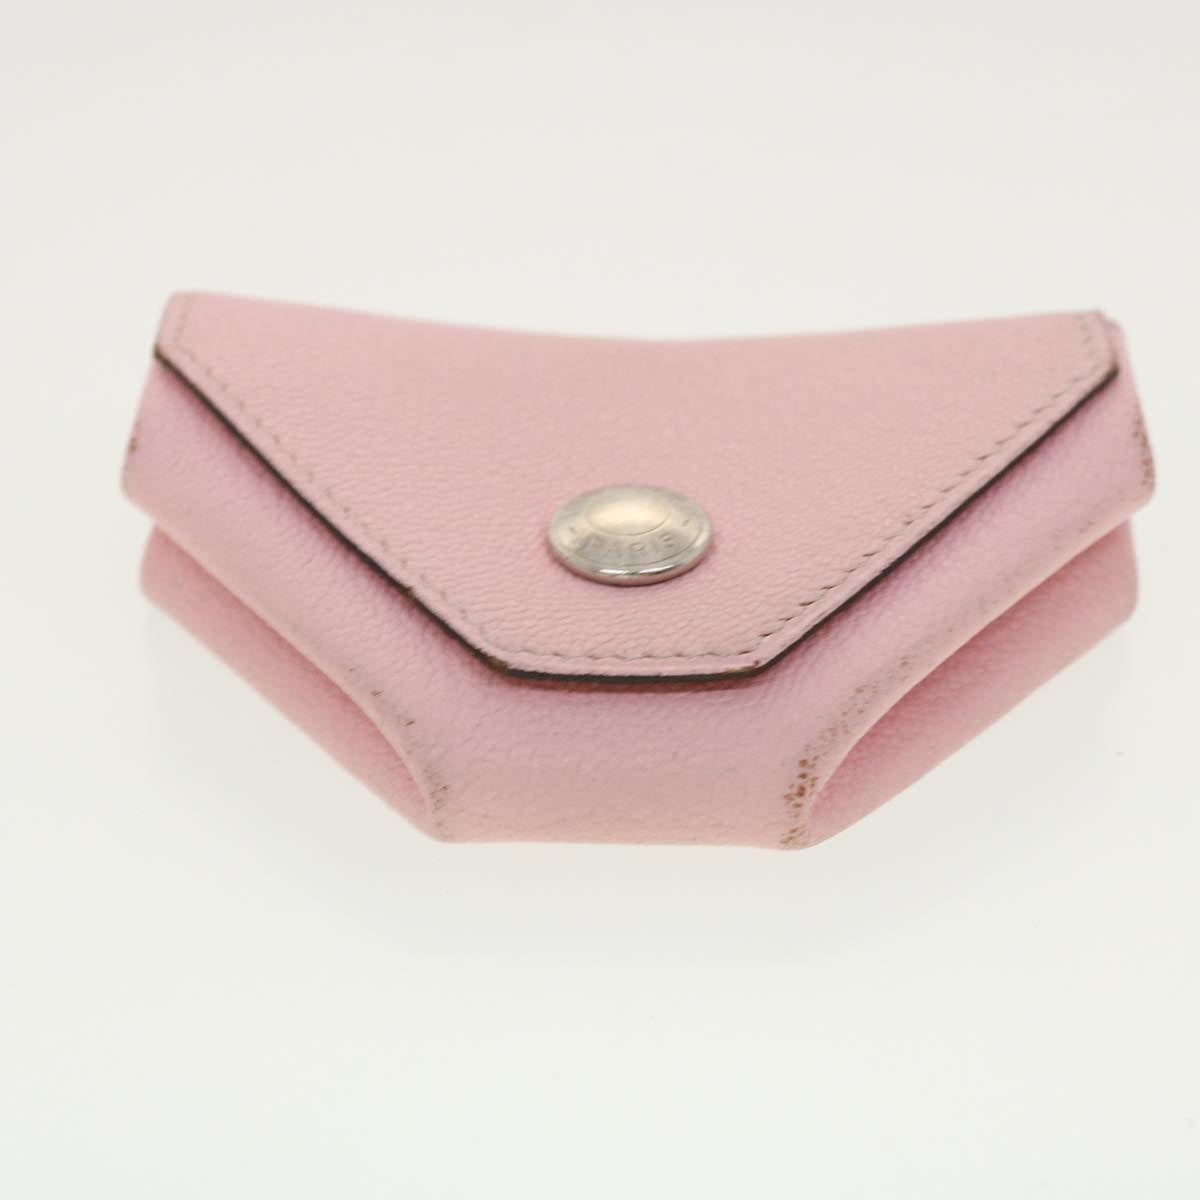 HERMES Revan Cattle Coin Purse Leather Pink Auth bs5292